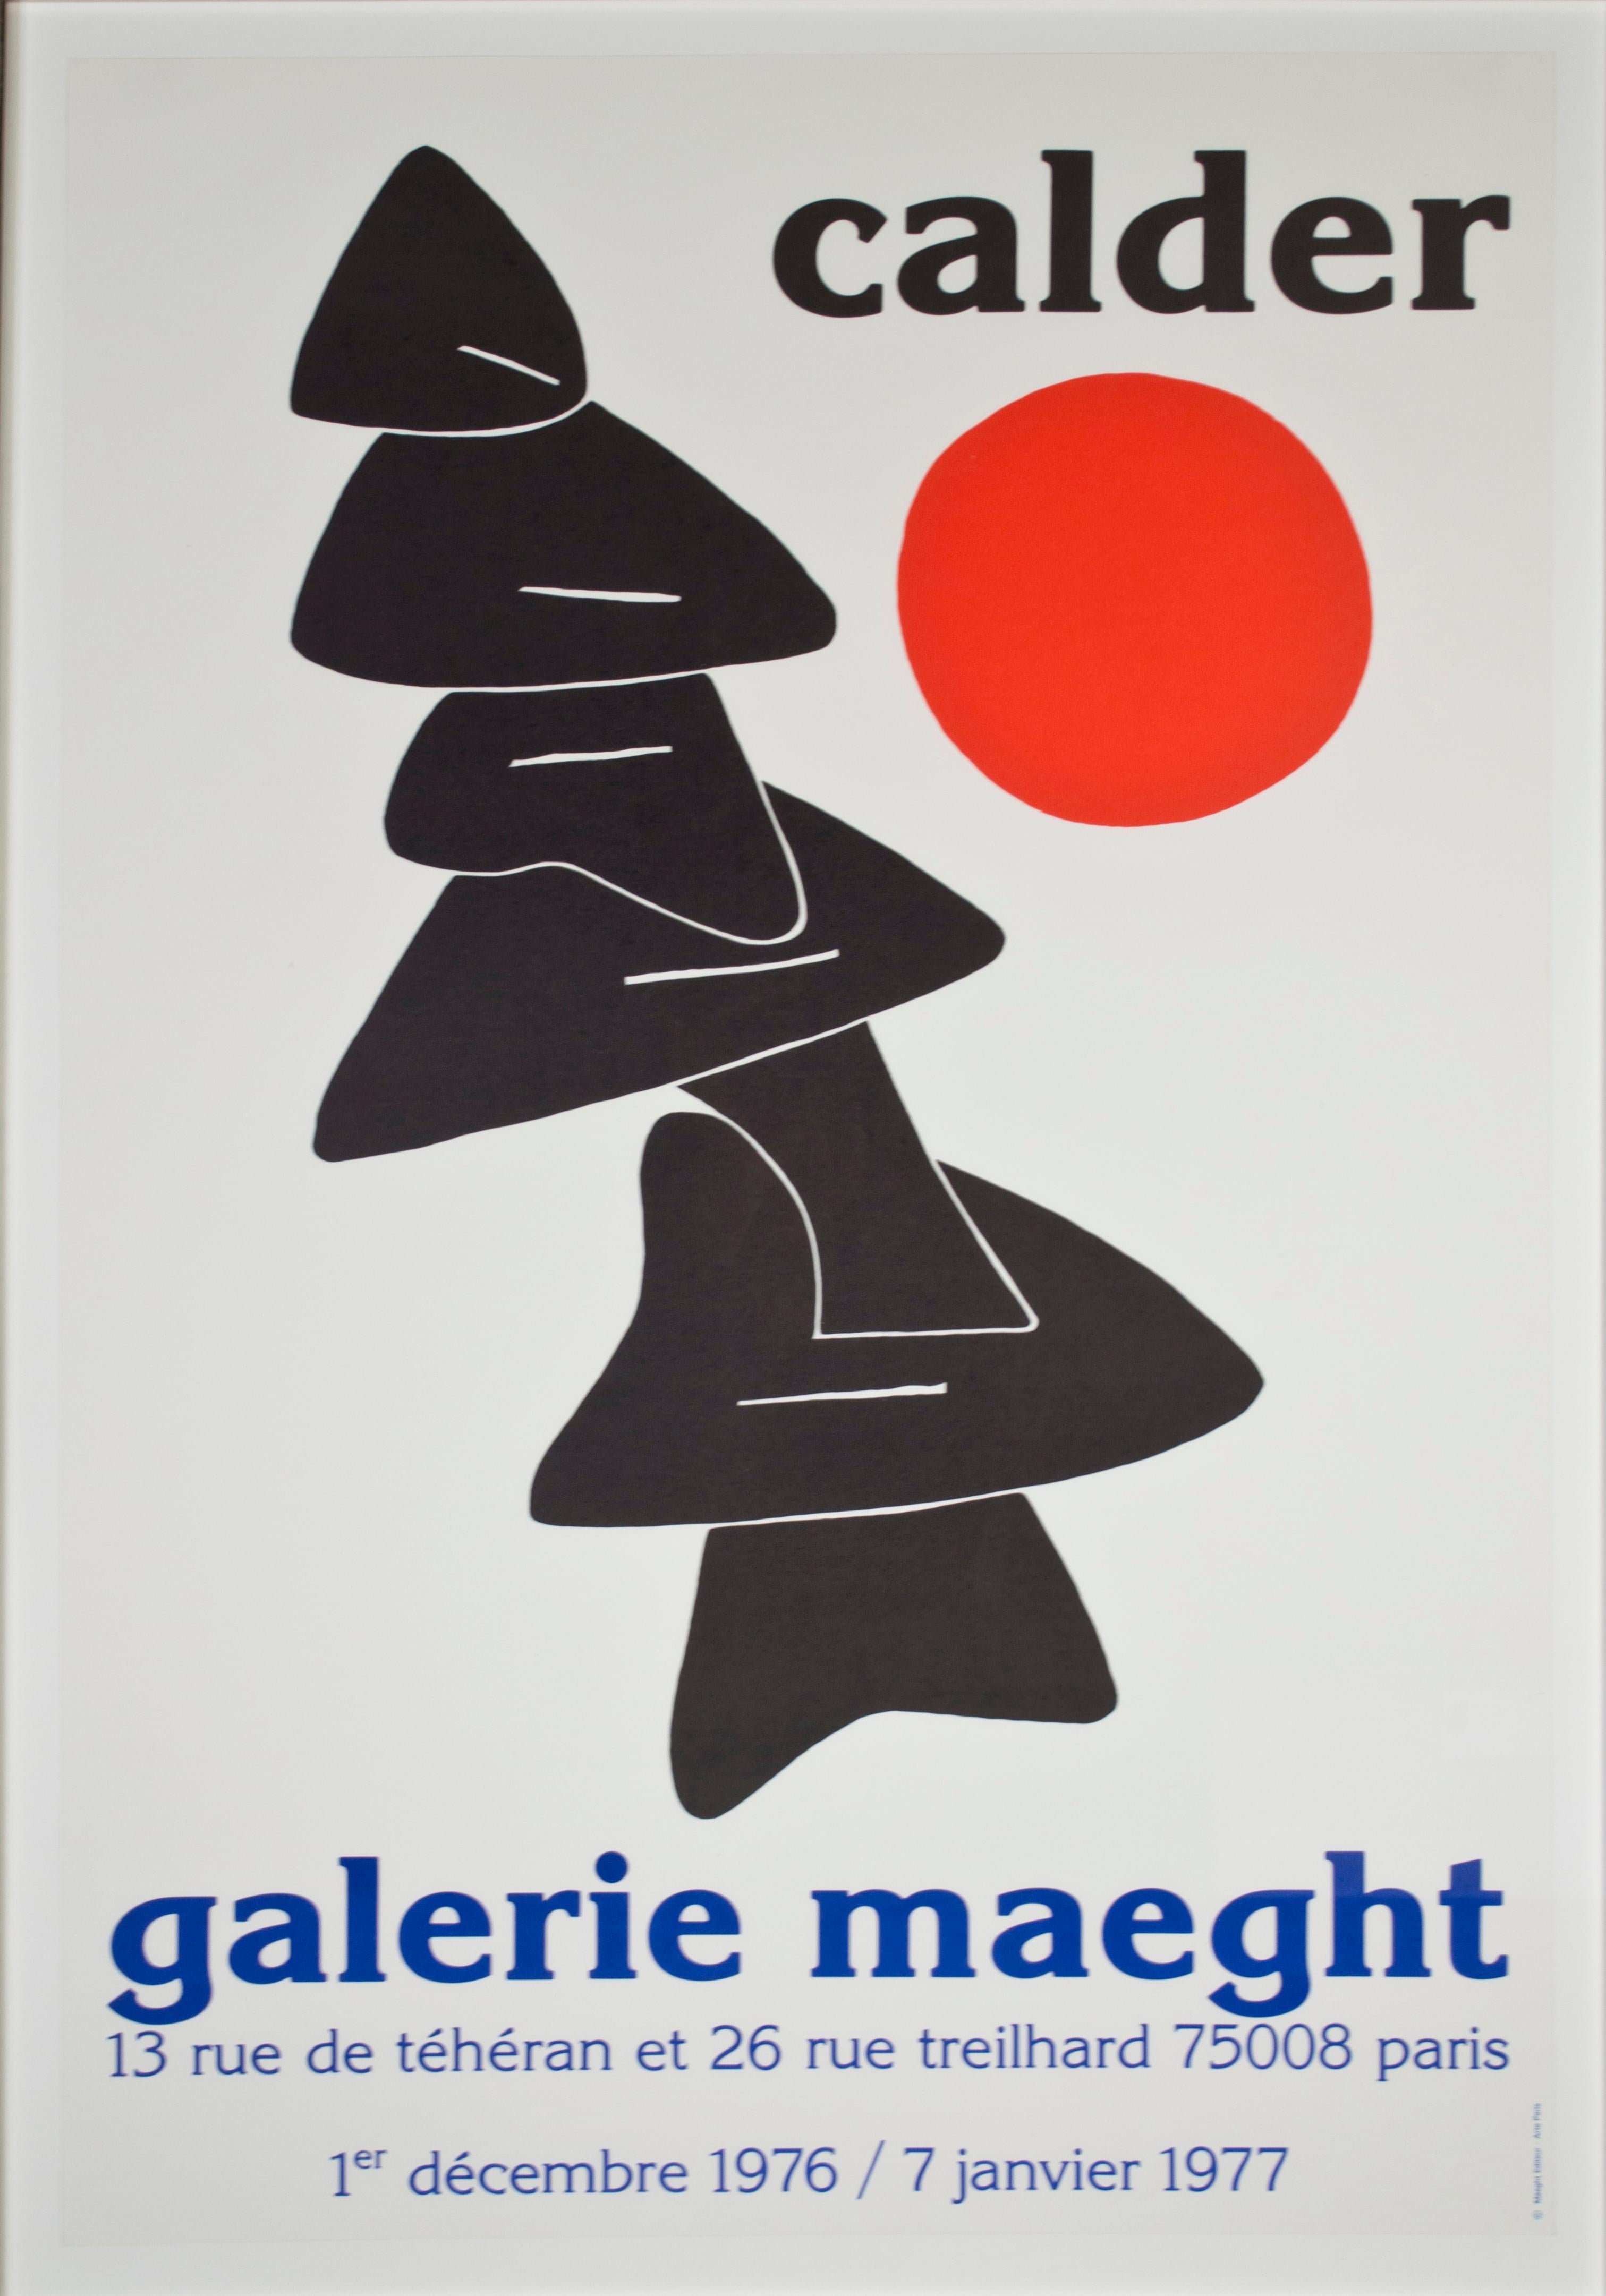 Alexander Calder Abstract Print - "Stabile with Red Sun Galerie Maeght, " Original Lithograph Poster by A. Calder